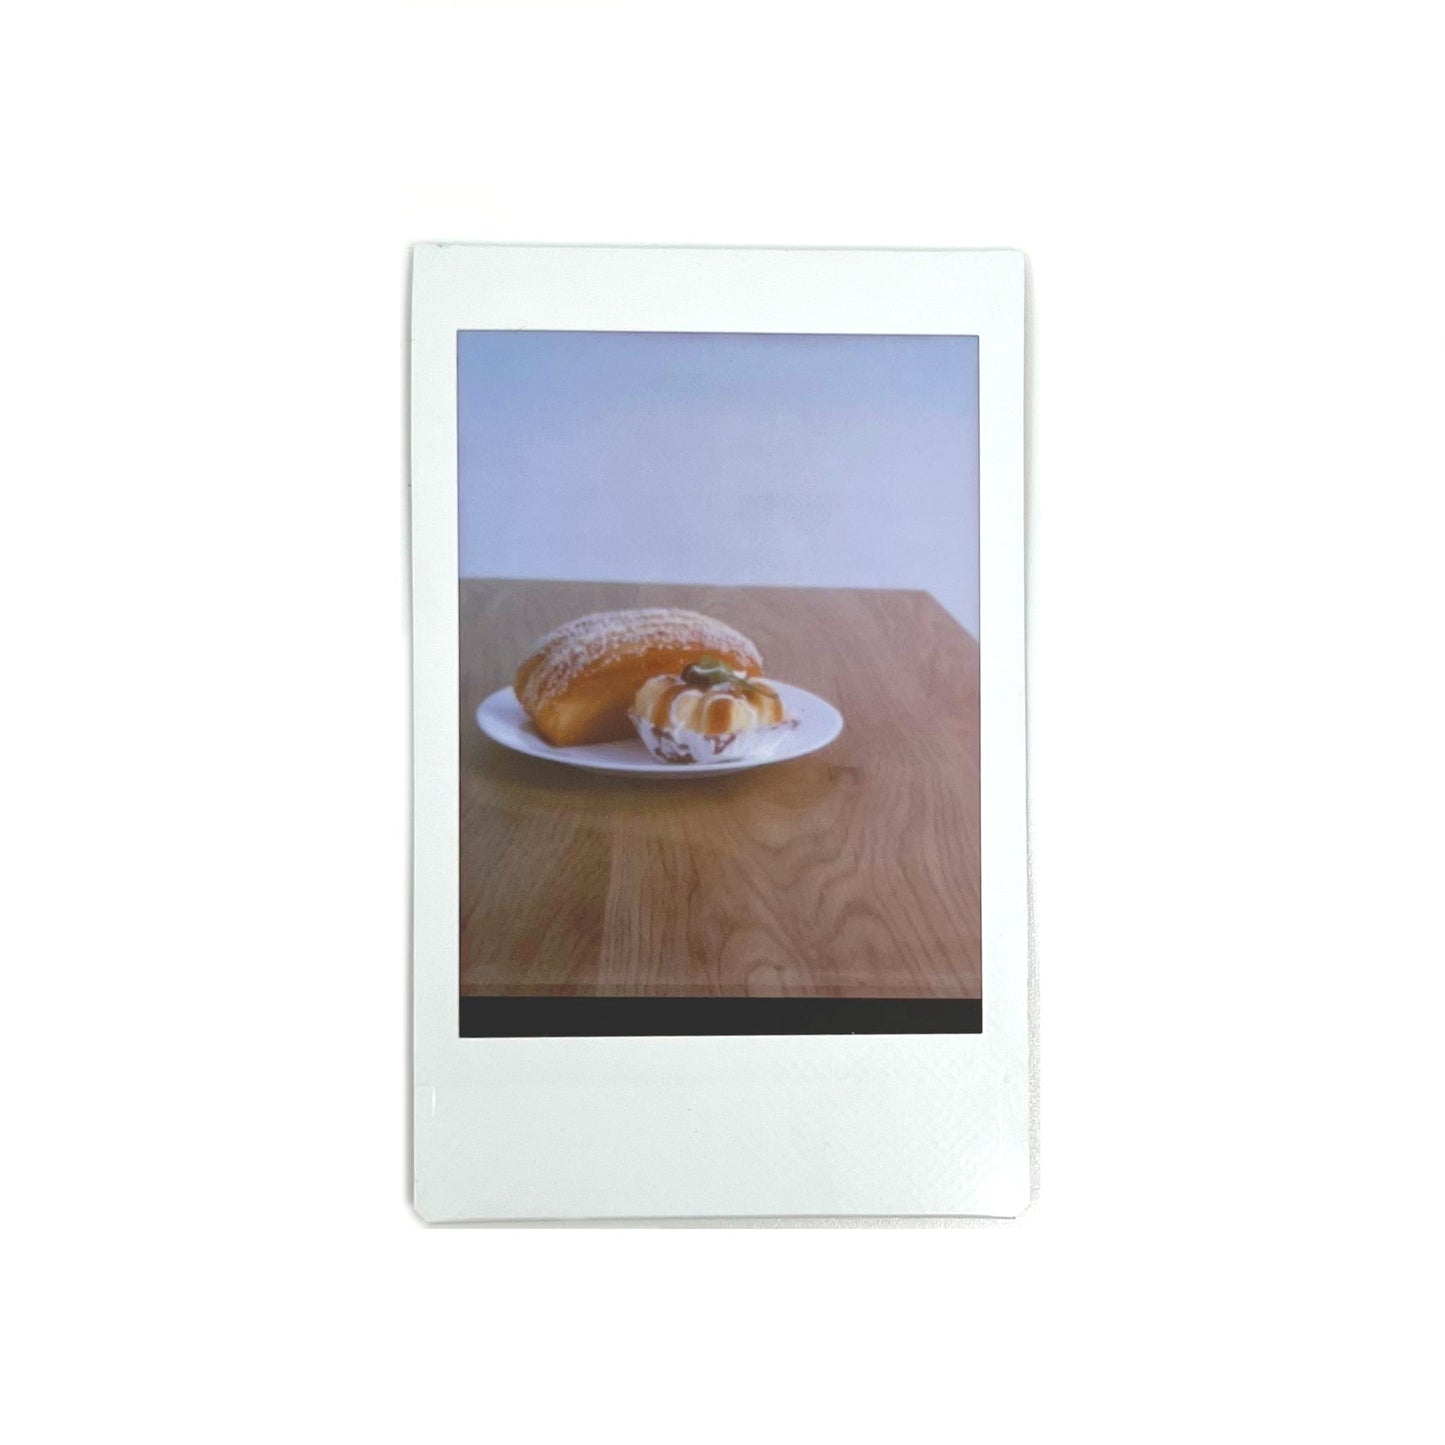  An instant photo captured with a Jollylook Pinhole Mini camera, set against a white background. The photo showcases a plate of delicious cakes